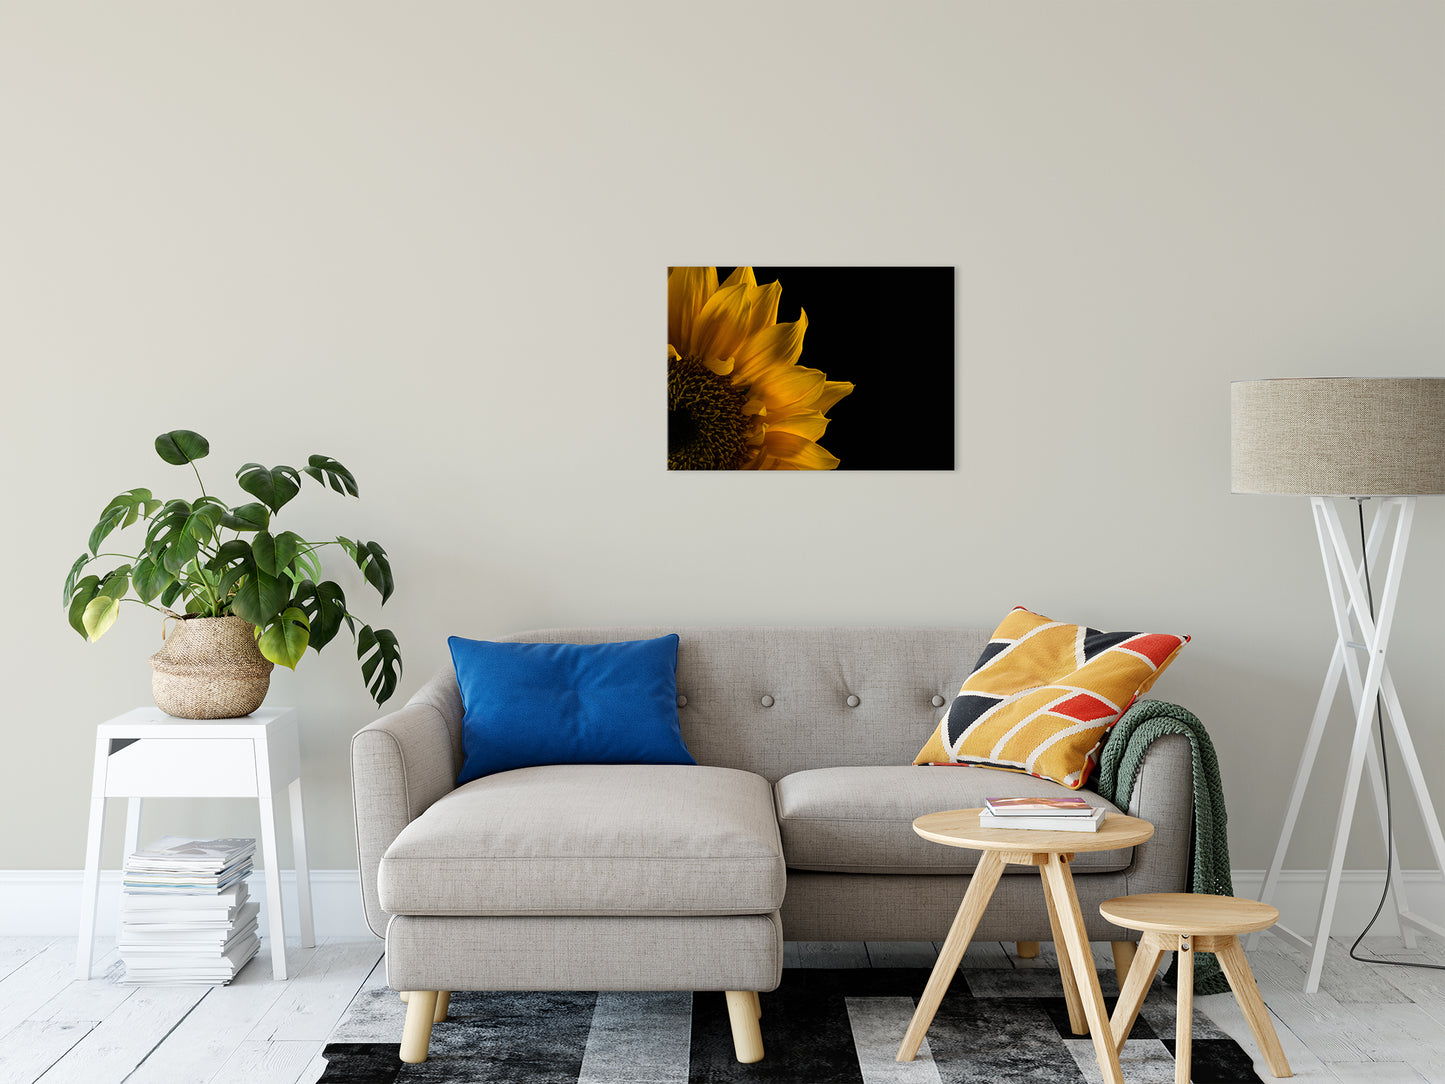 Sunflower in Corner Nature / Floral Photo Fine Art Canvas Wall Art Prints 20" x 30" - PIPAFINEART